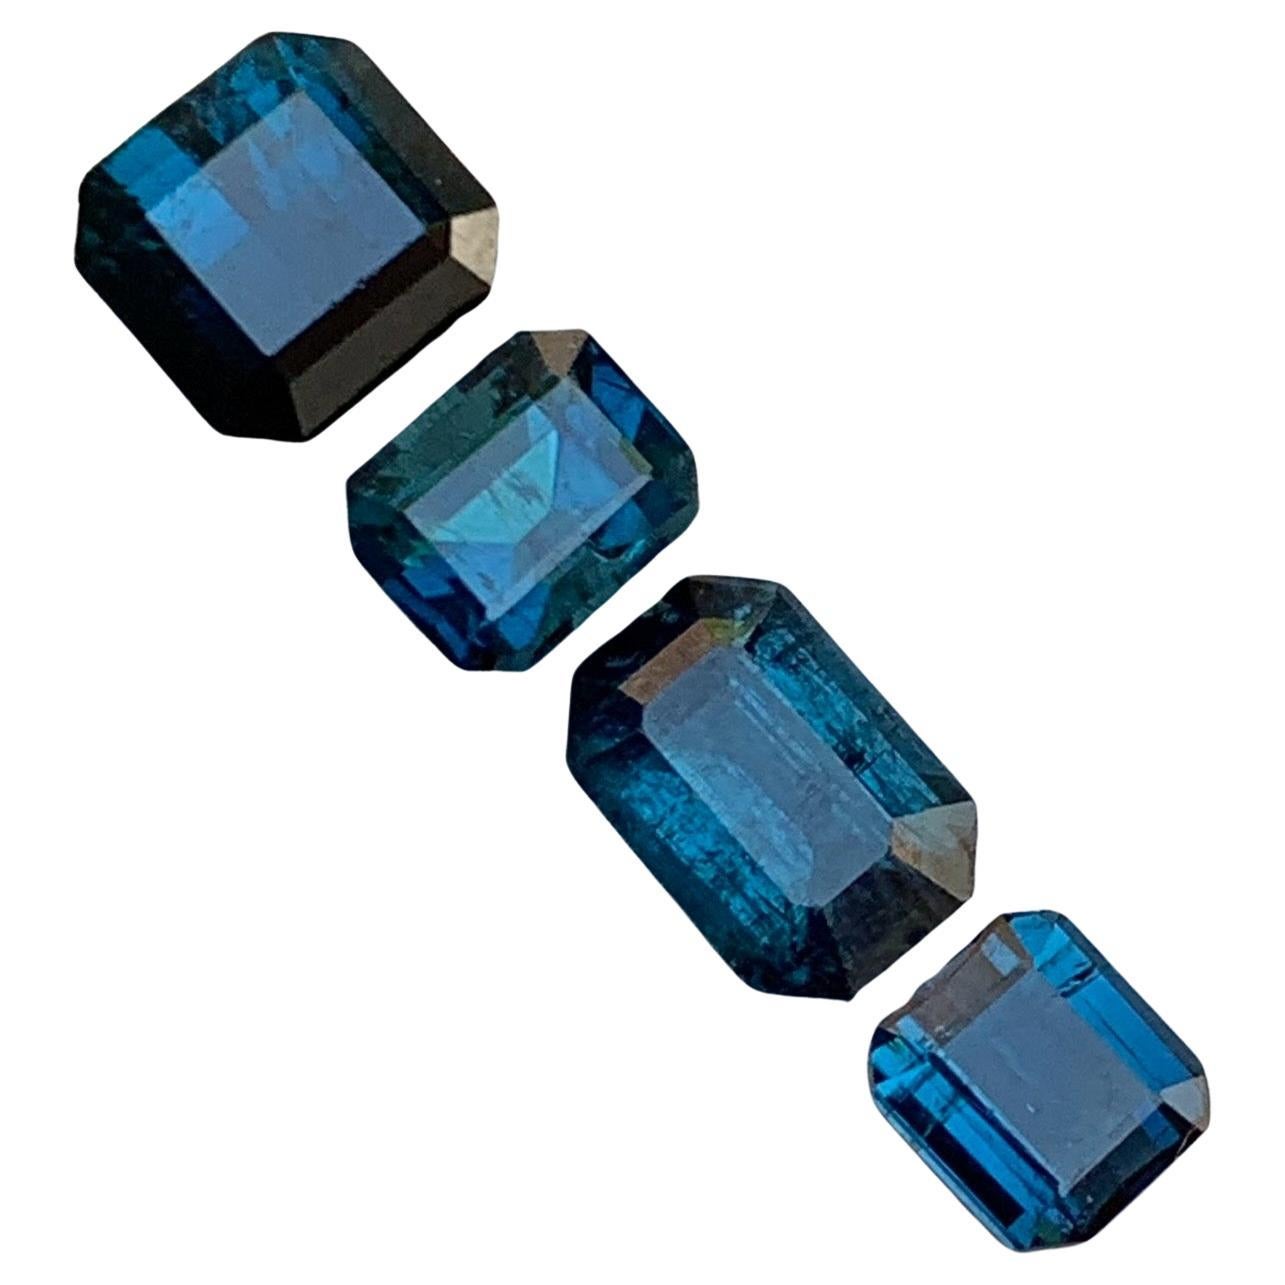 Rare Darkish Inky Blue Natural Tourmaline Gemstones Lot, 4.85 Ct for Jewelry For Sale